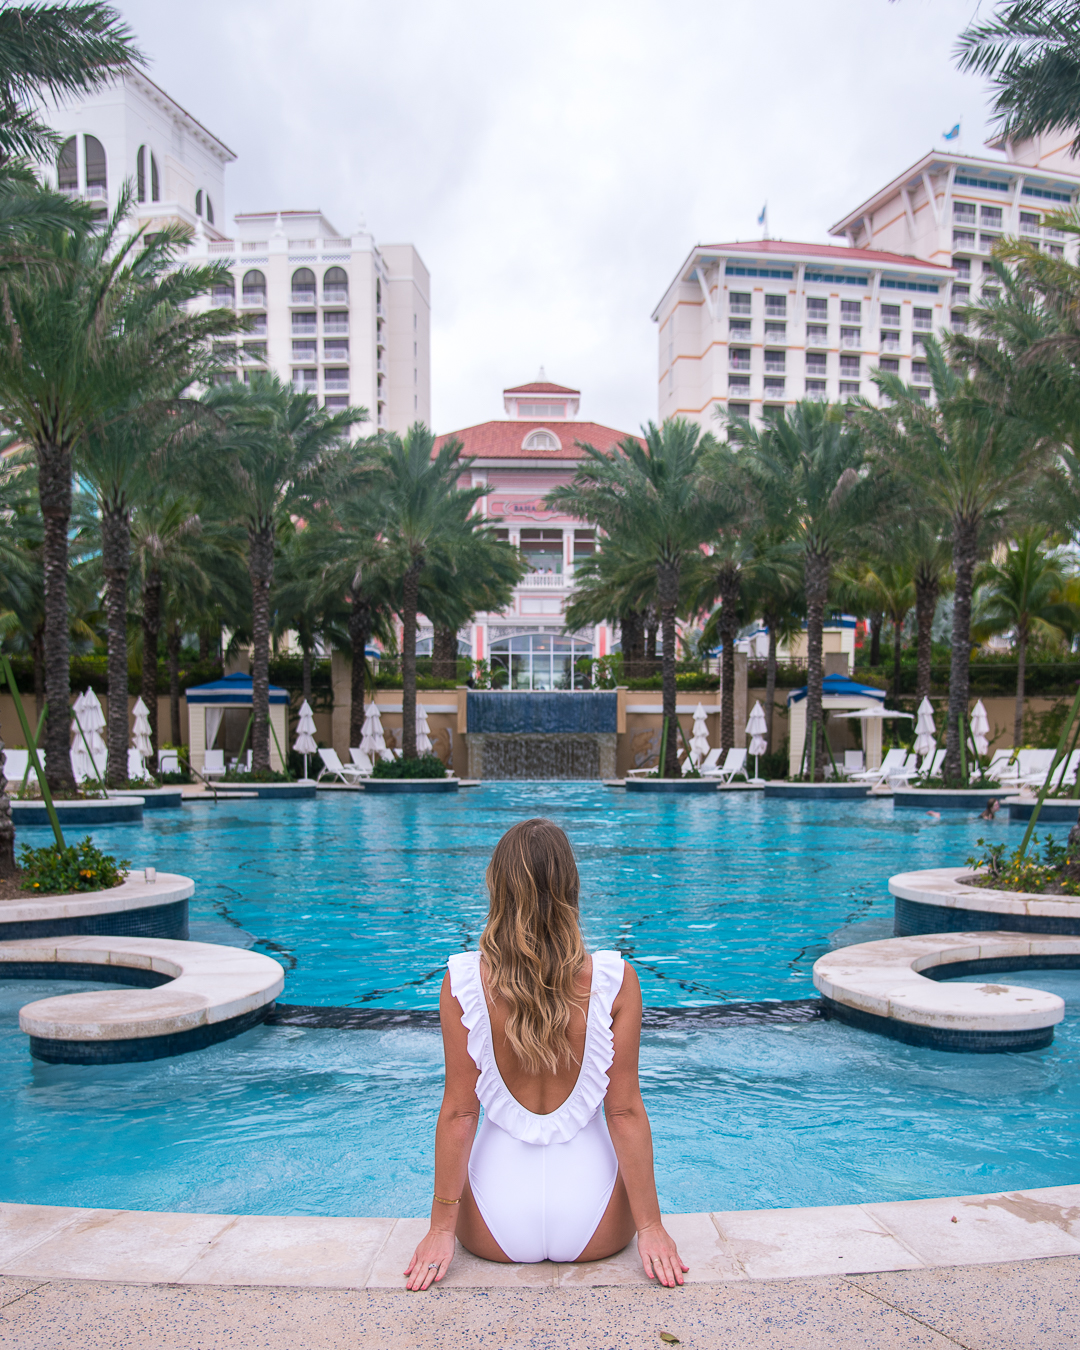 white ruffle back one piece swimsuit - baha mar resort review in the bahamas by popular Chicago travel blogger Visions of Vogue